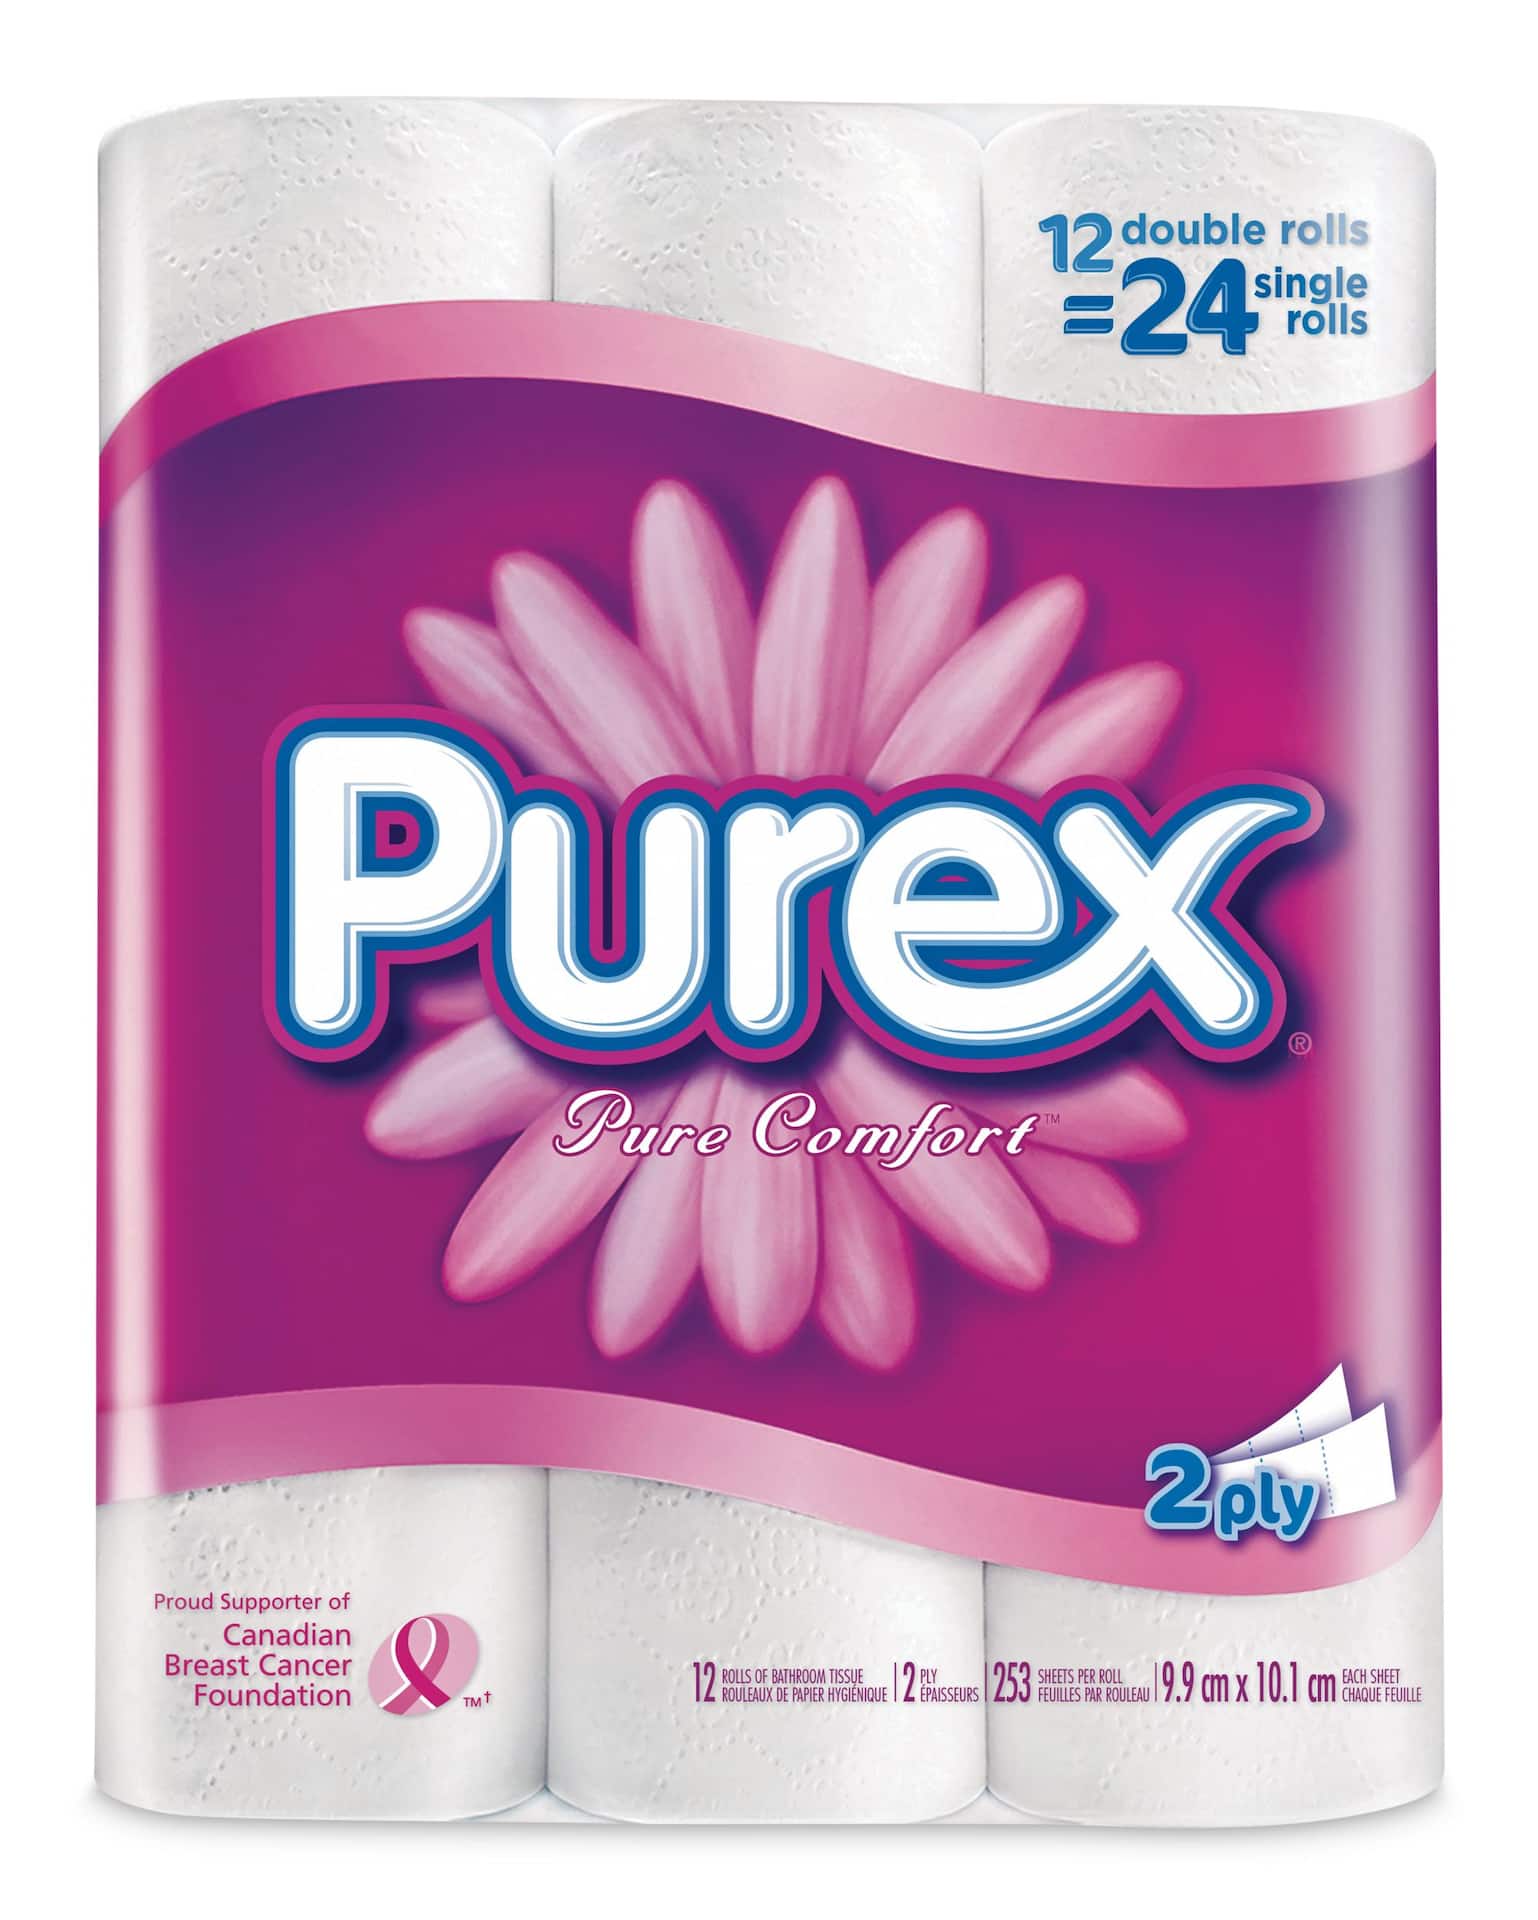 Purex Pure Comfort Double Roll Toilet Paper, 2-ply Tissue, 12-pk